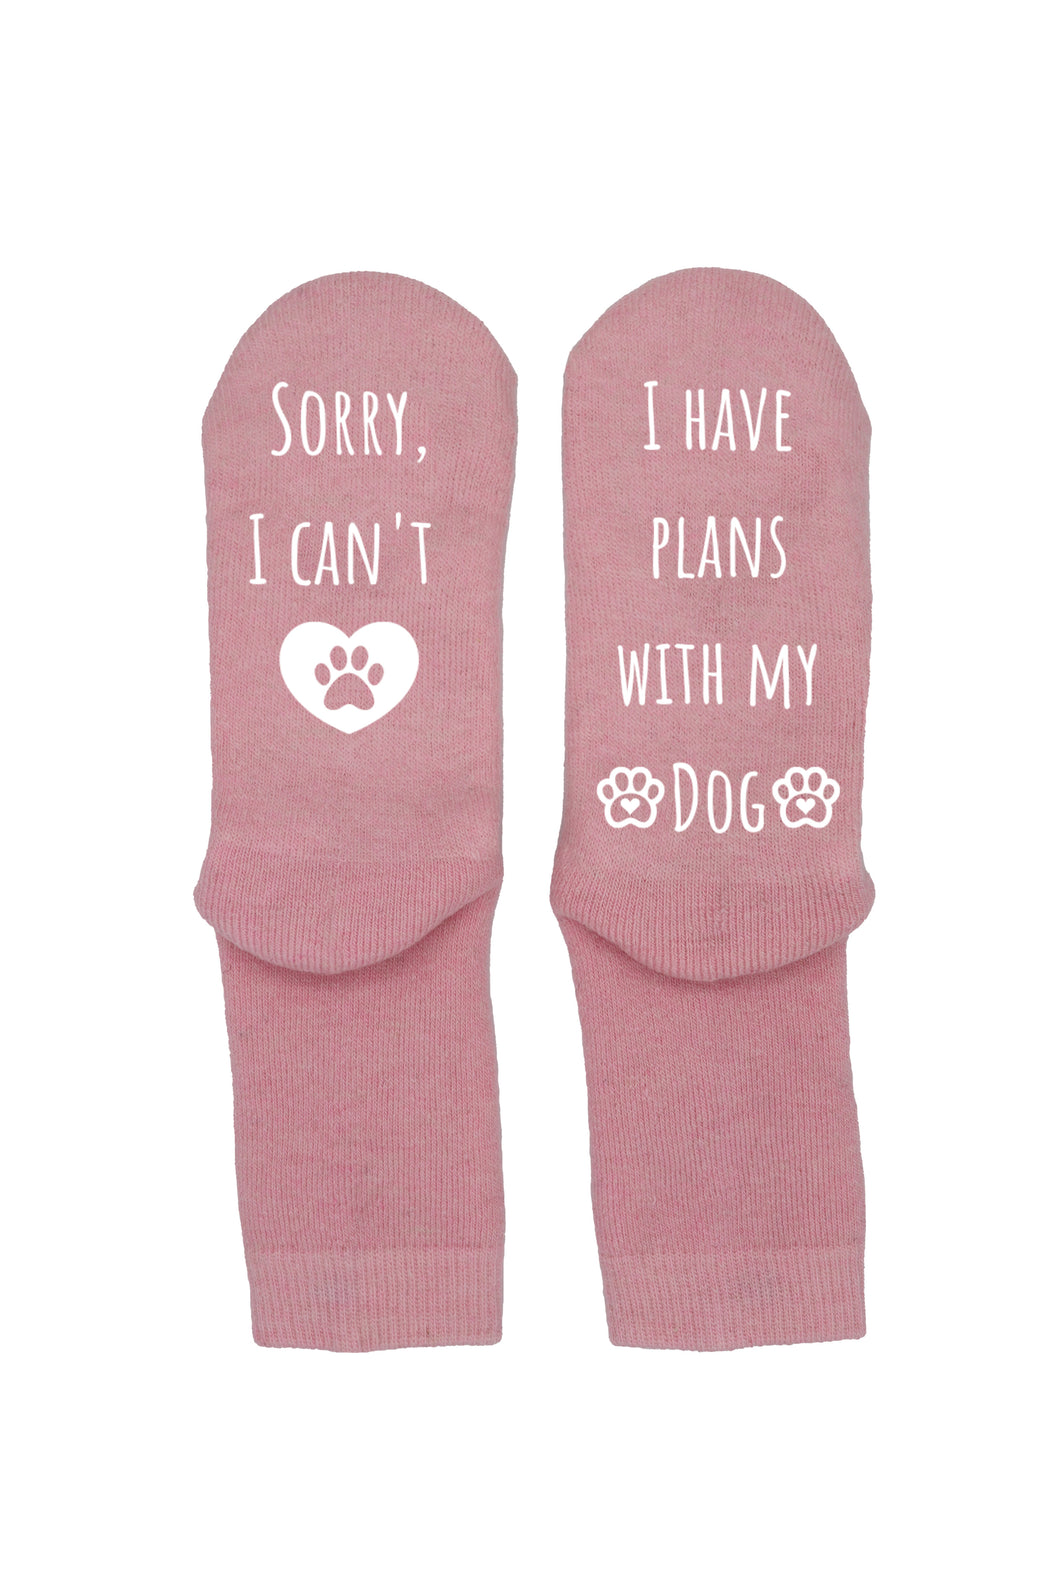 I have plans with my Dog - Socks